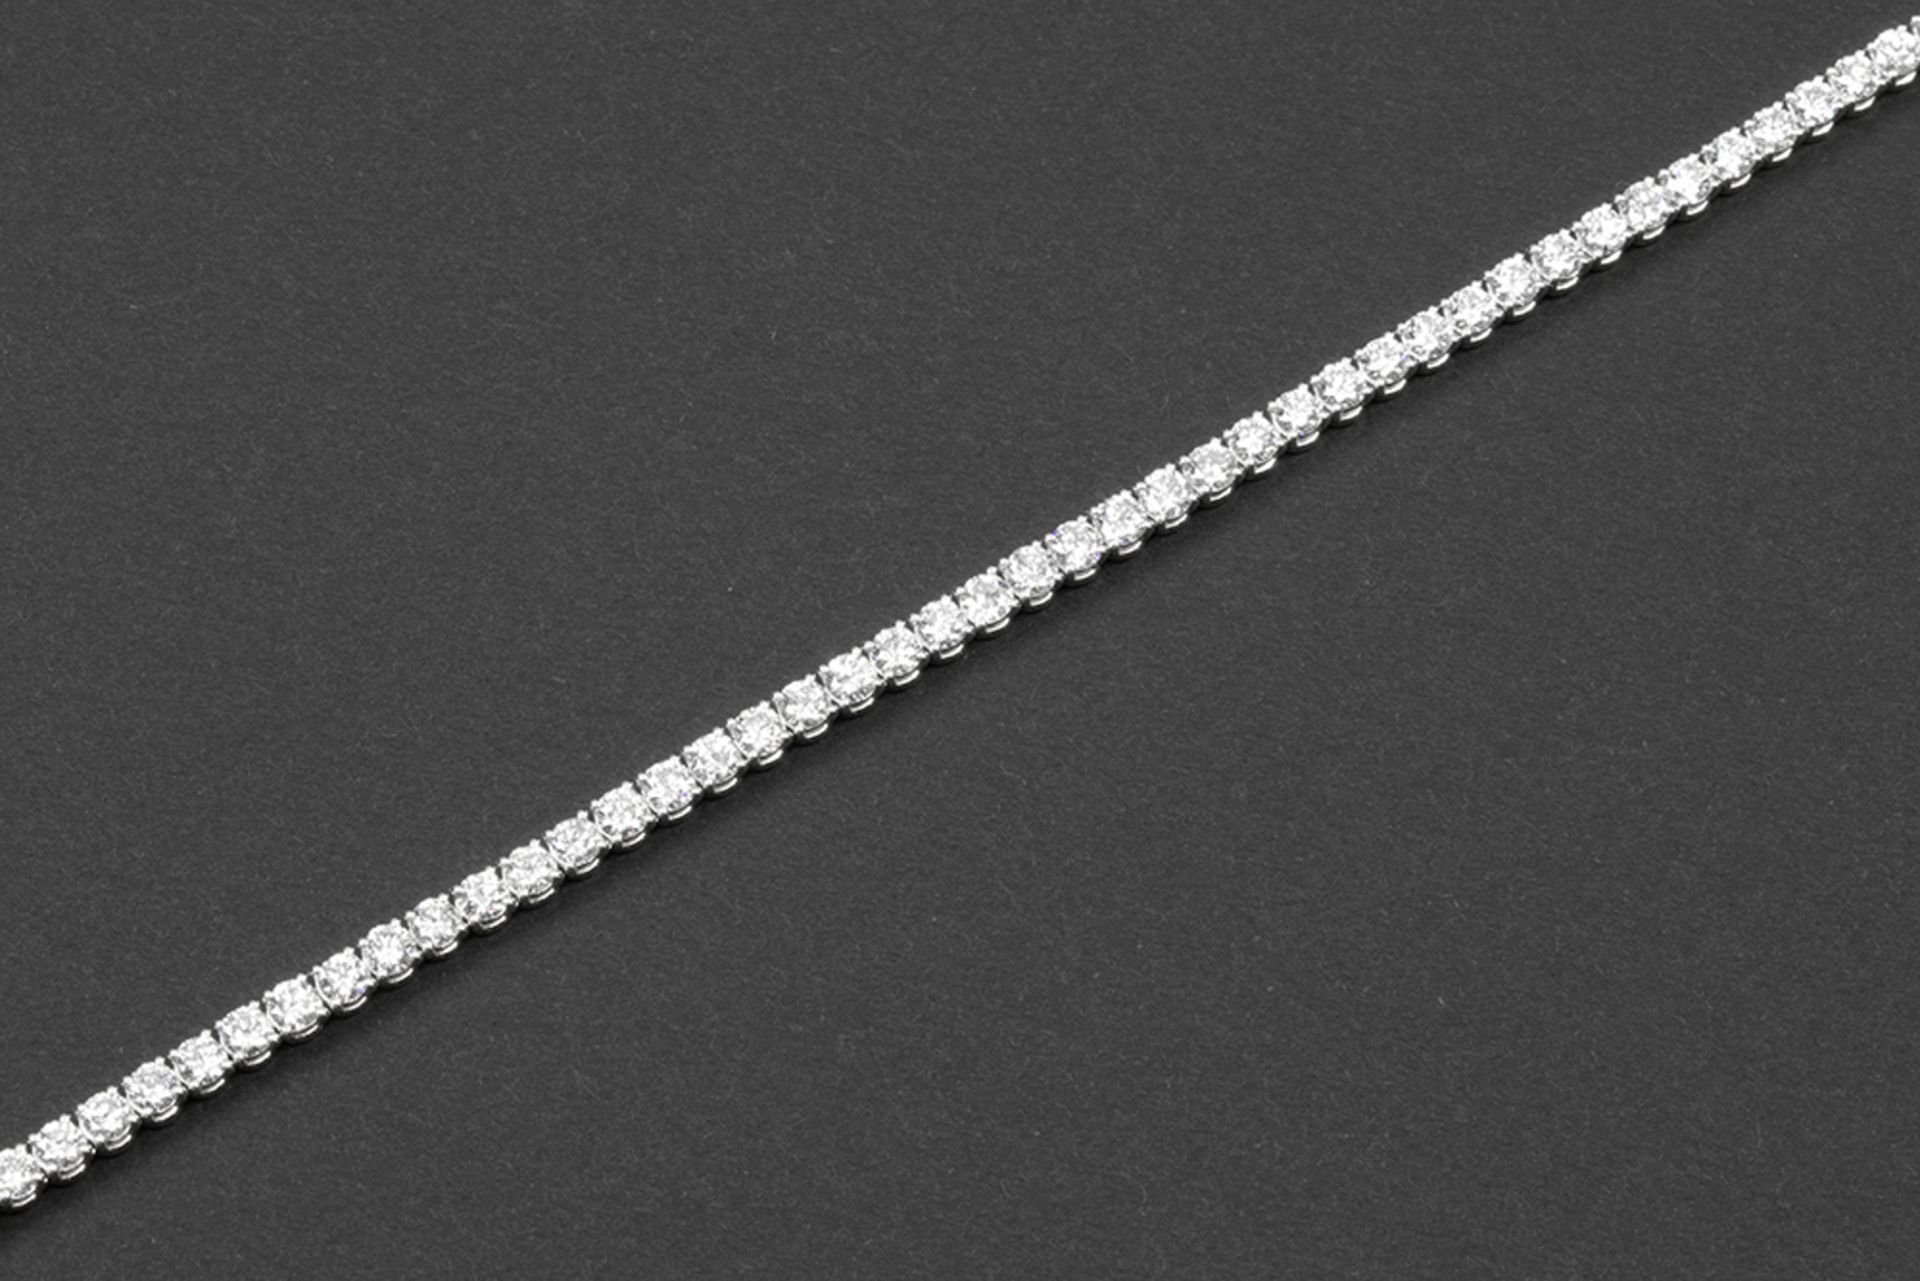 bracelet in white gold (18 carat) with at least 5,60 carat of very high quality brilliant cut